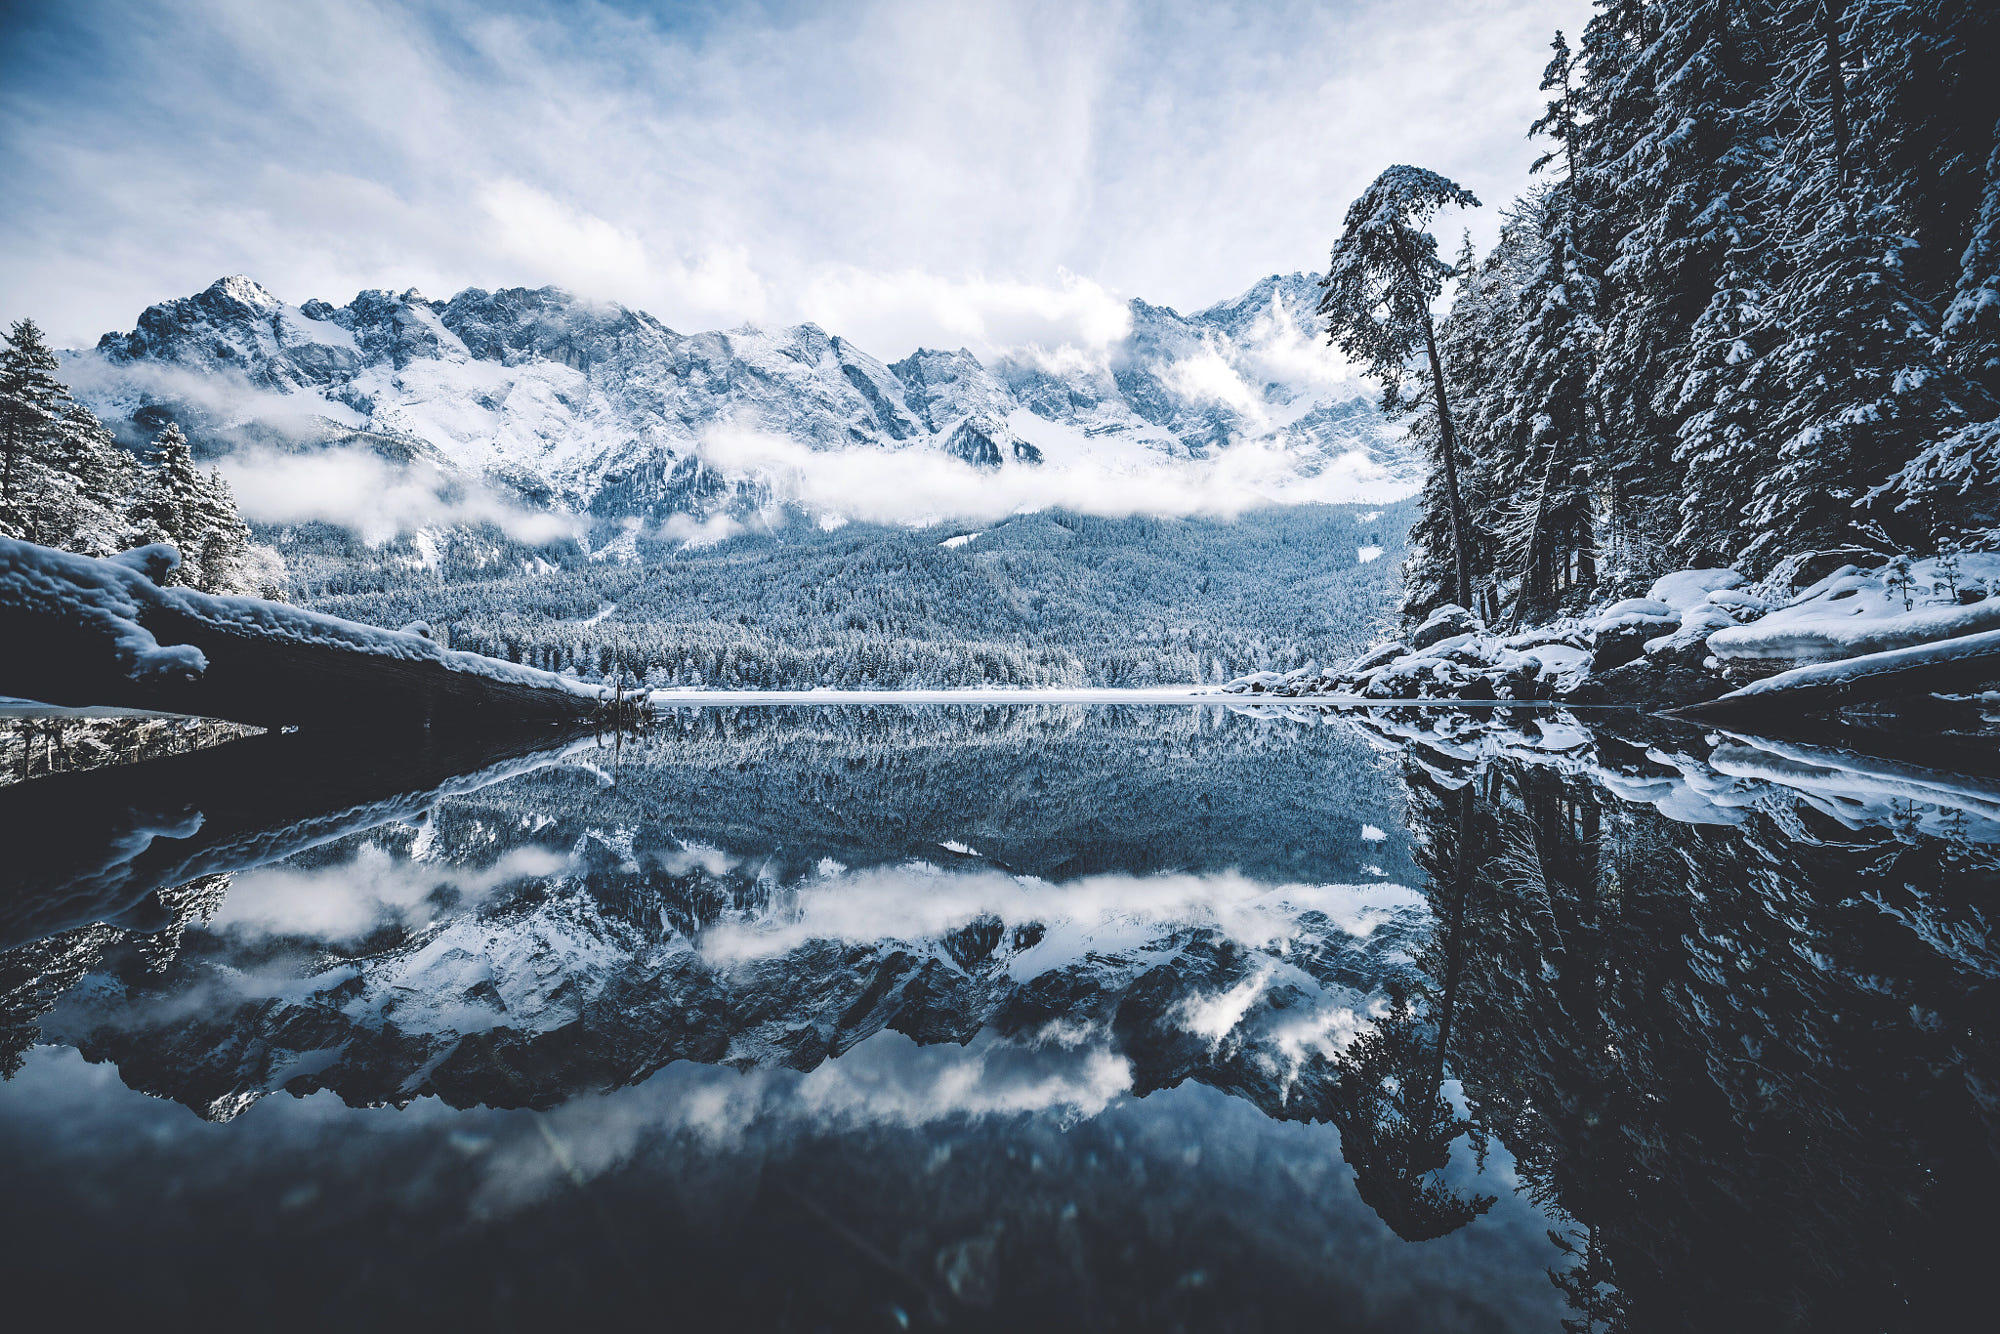 Eibsee reflections.